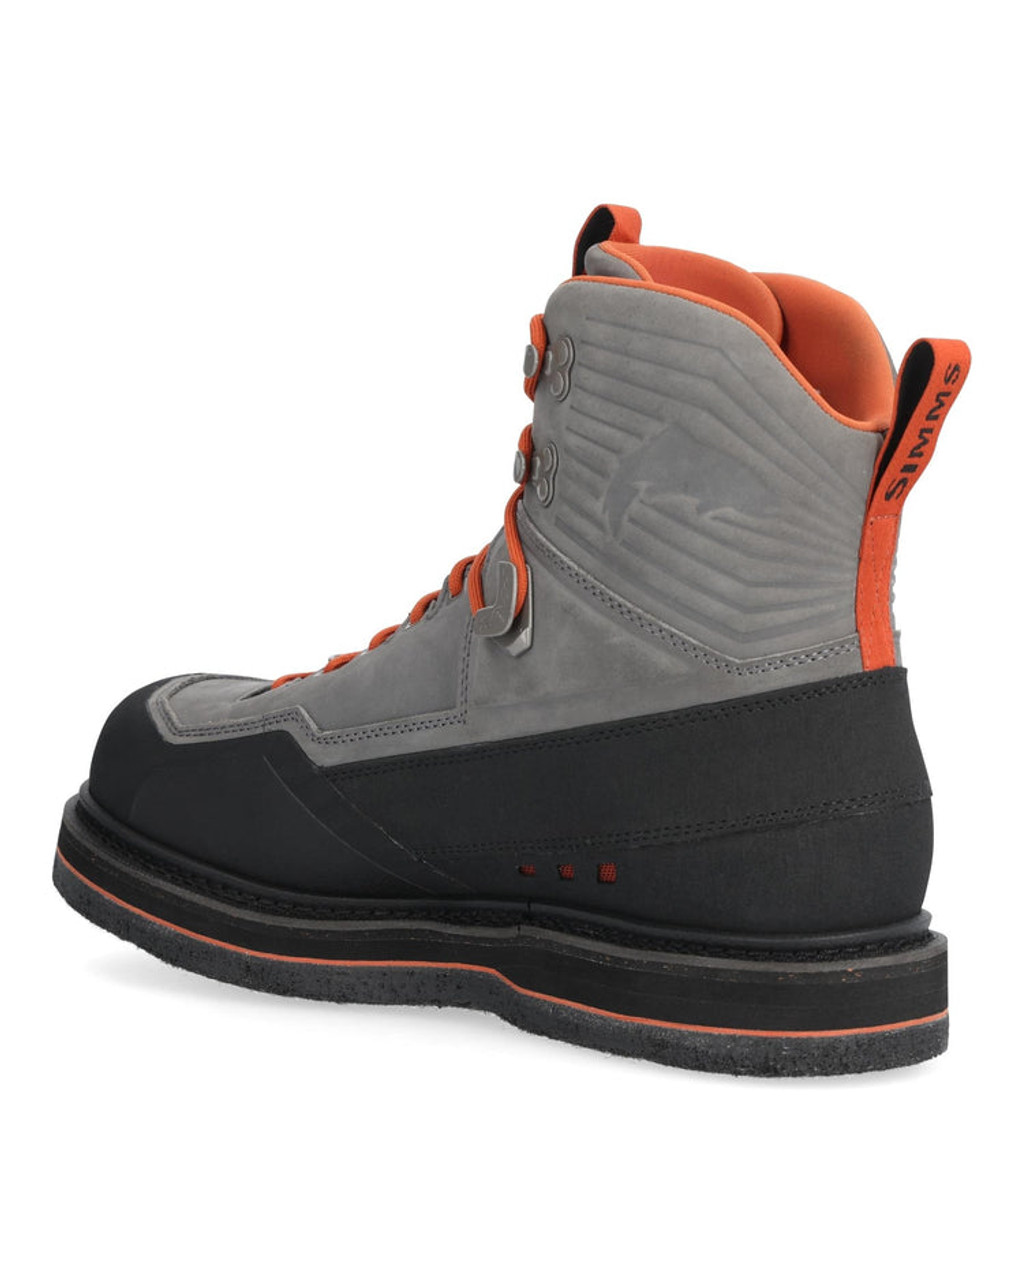 Simms M's G3 Guide Wading Boots - Felt Sole